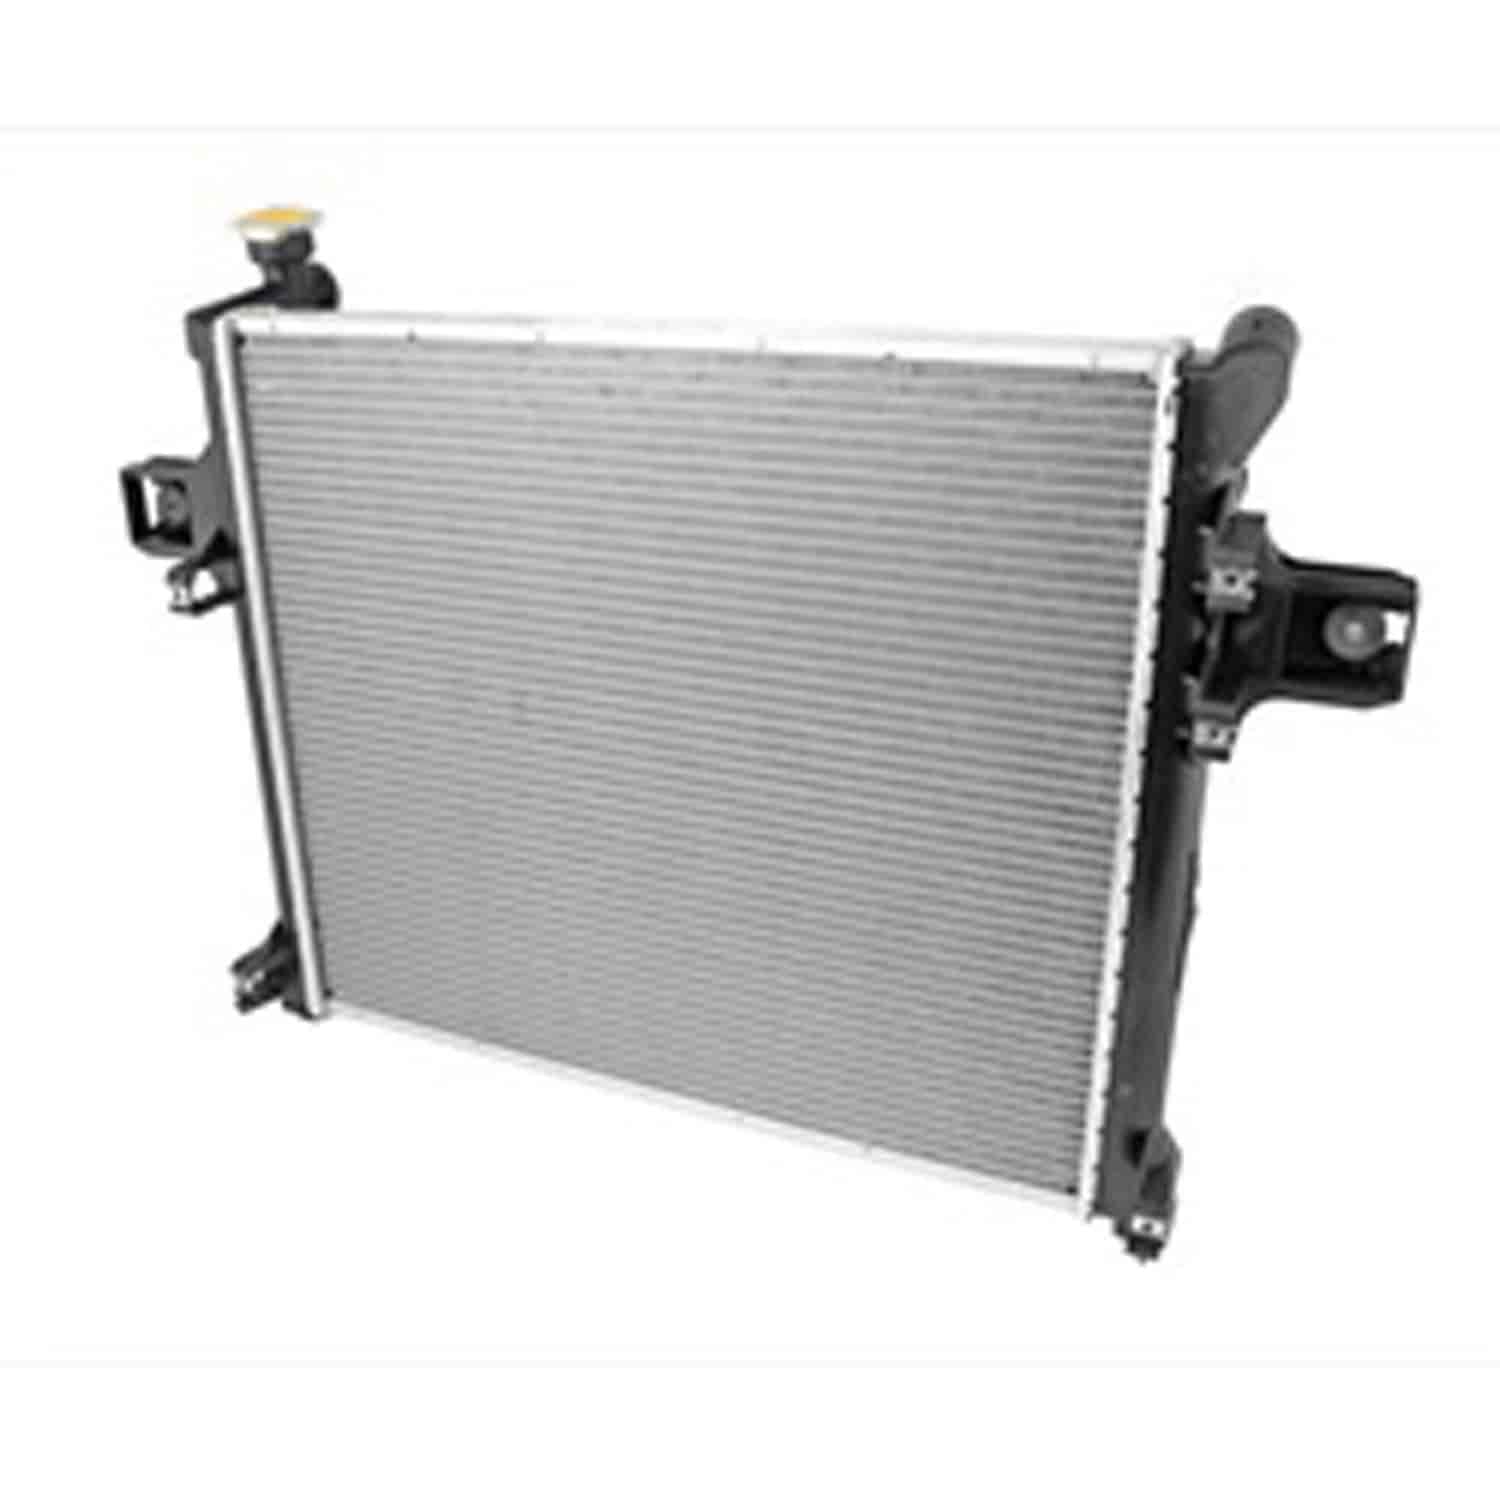 This 1 row radiator from Omix-ADA fits 05-08 Grand Cherokee 3.7L and 4.7L 06-09 Grand Cherokee 6.1L .